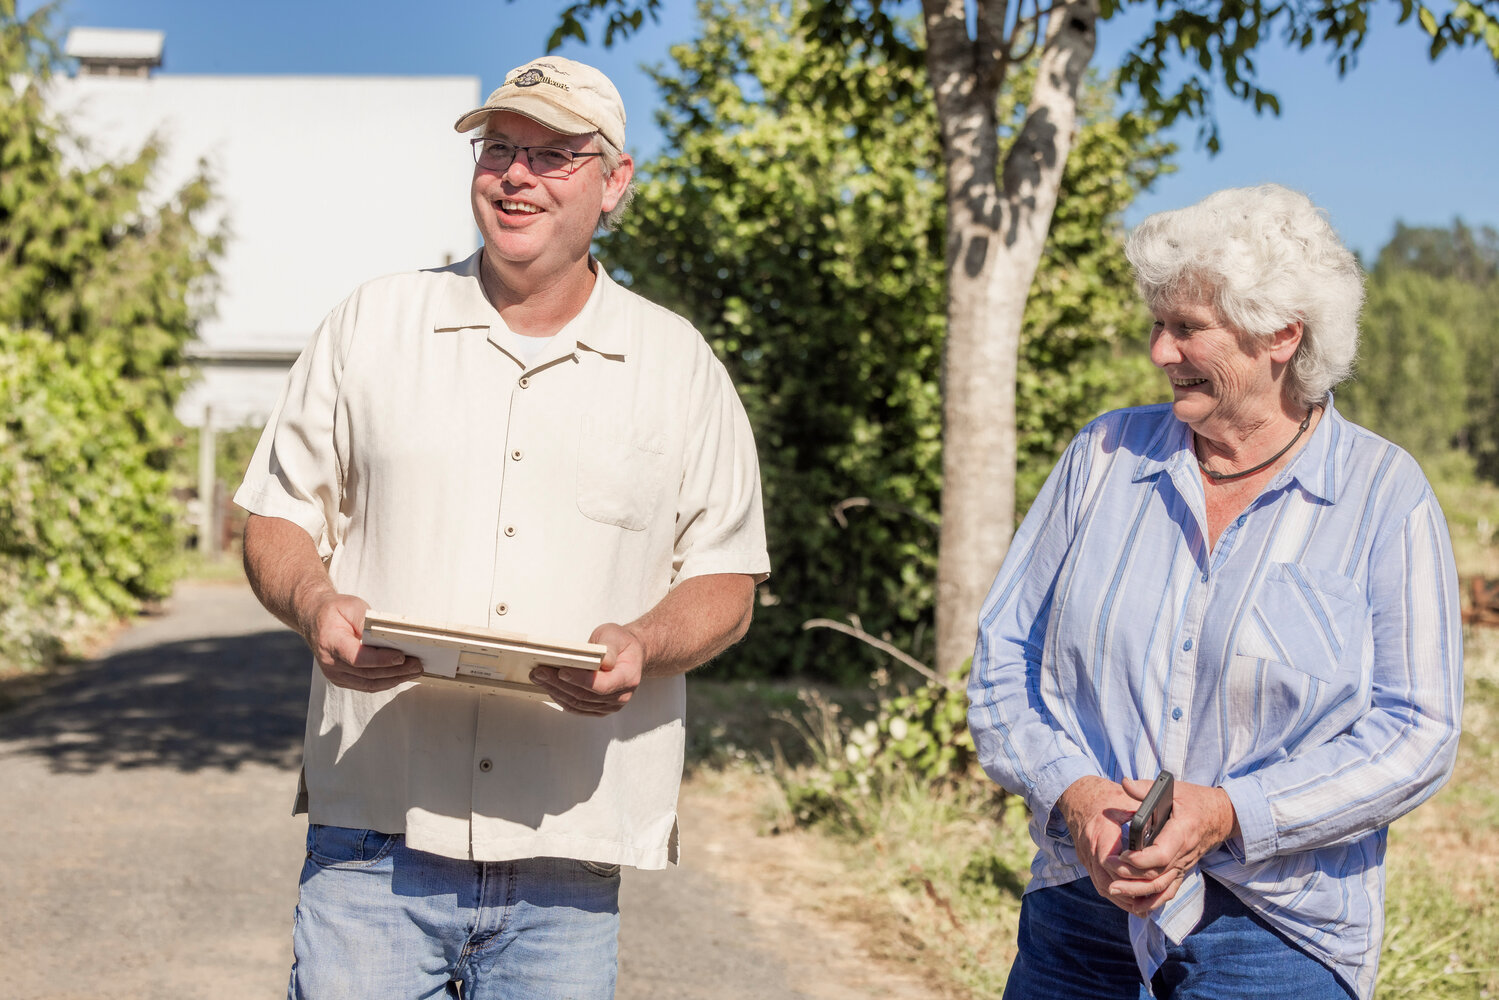 Dan Maughn smiles while talking about beekeeping after receiving a gift from Lewis County Farm Bureau President Maureen Harckom during a tour on Monday, July 31.